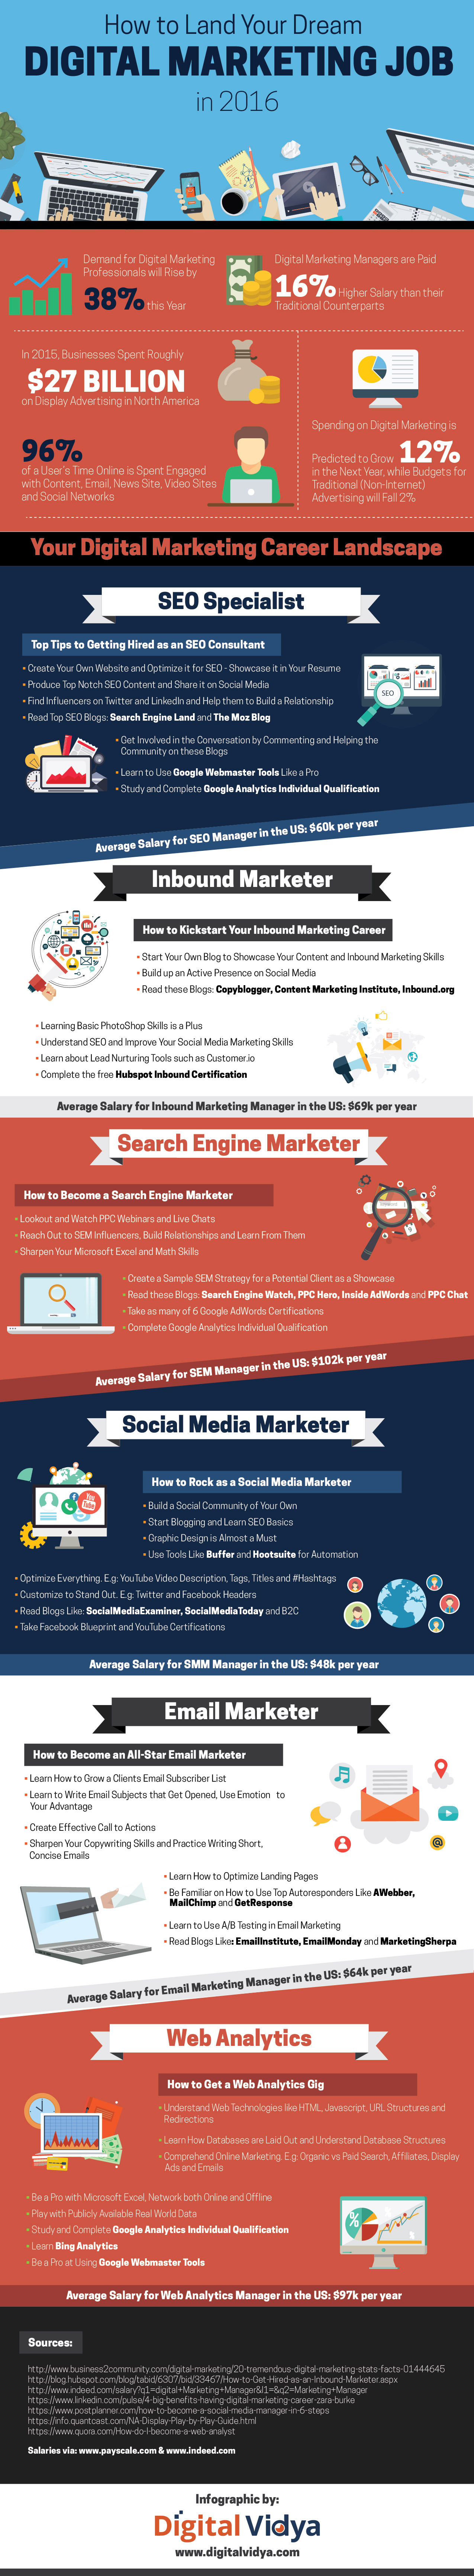 How_to_Land_Your_Dream_Digital_Marketing_Job_in_2016_Infographic_image